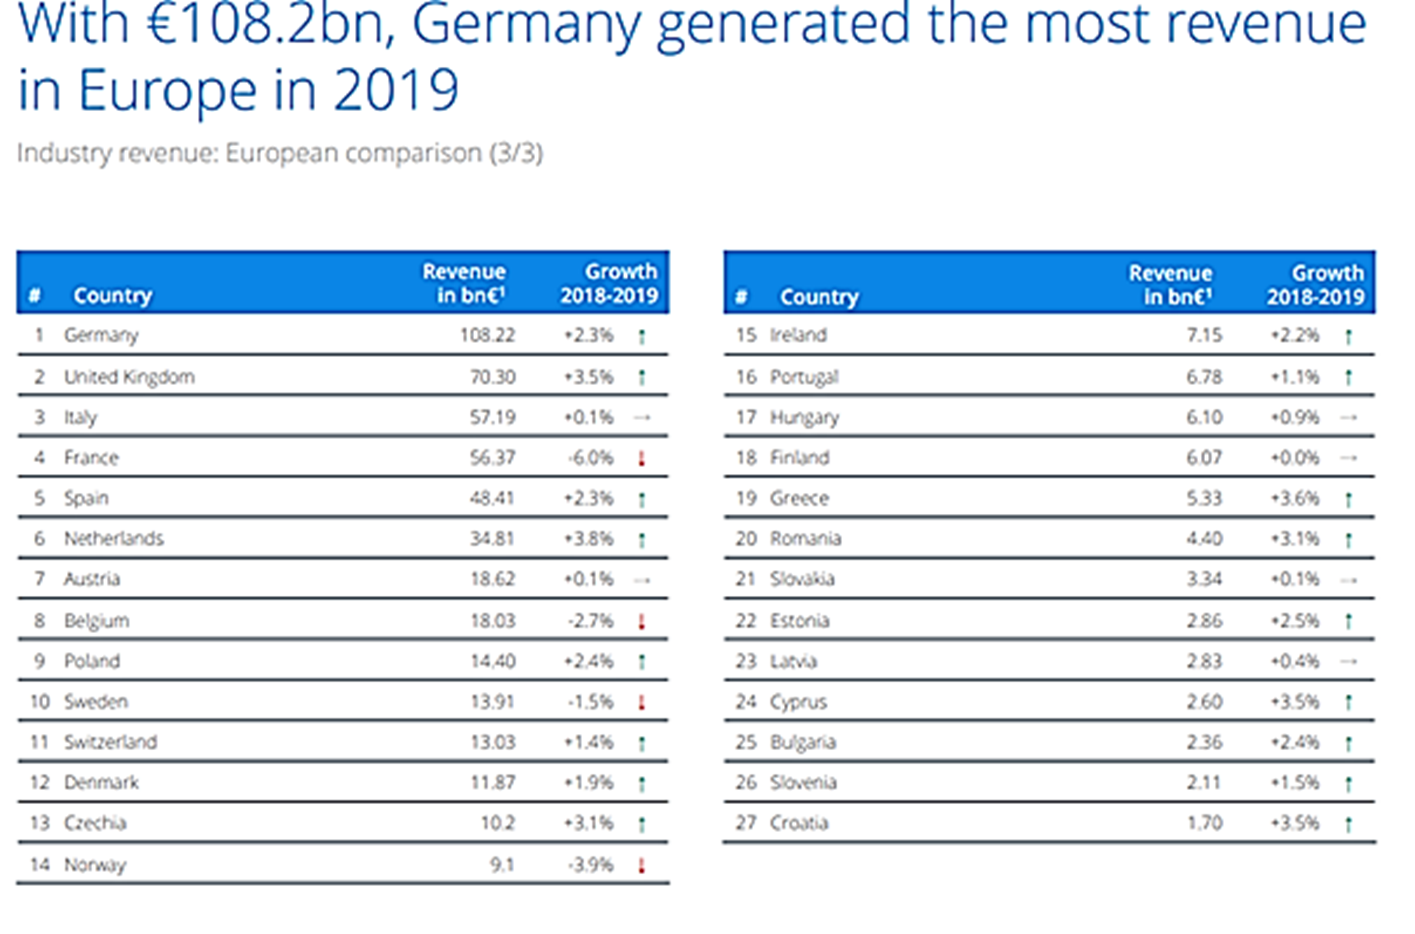 Germany's industry revenue compared to other European countries